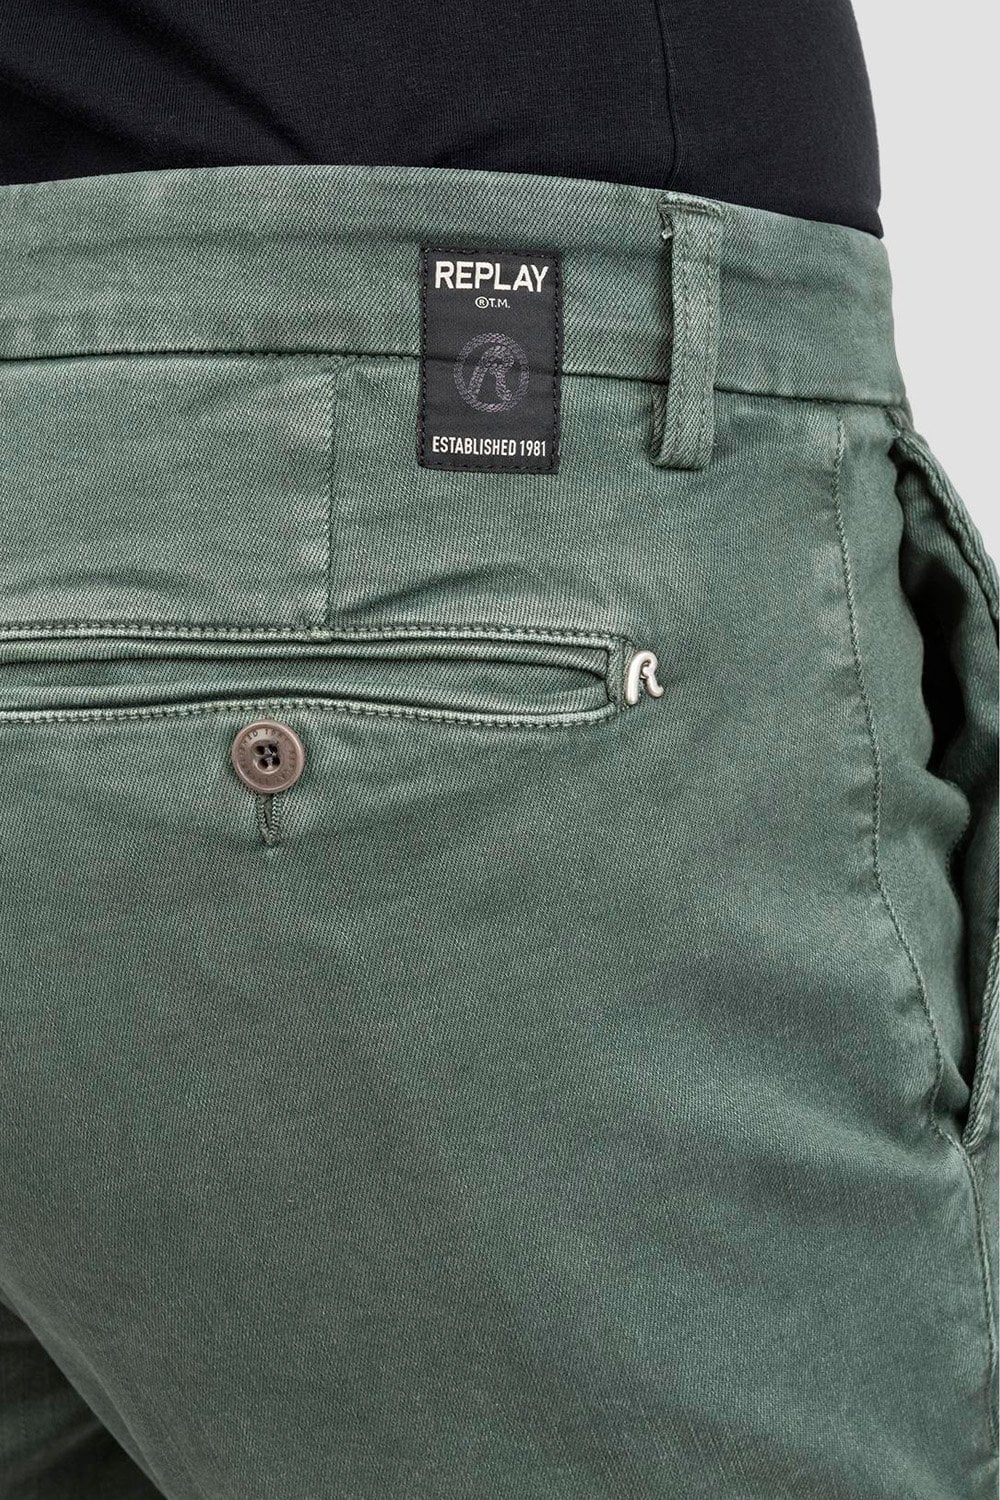 Buy the Replay Hyperflex Slim Fit Chino Gree in Khaki Green at Intro. Spend £50 for free UK delivery. Official stockists. We ship worldwide.